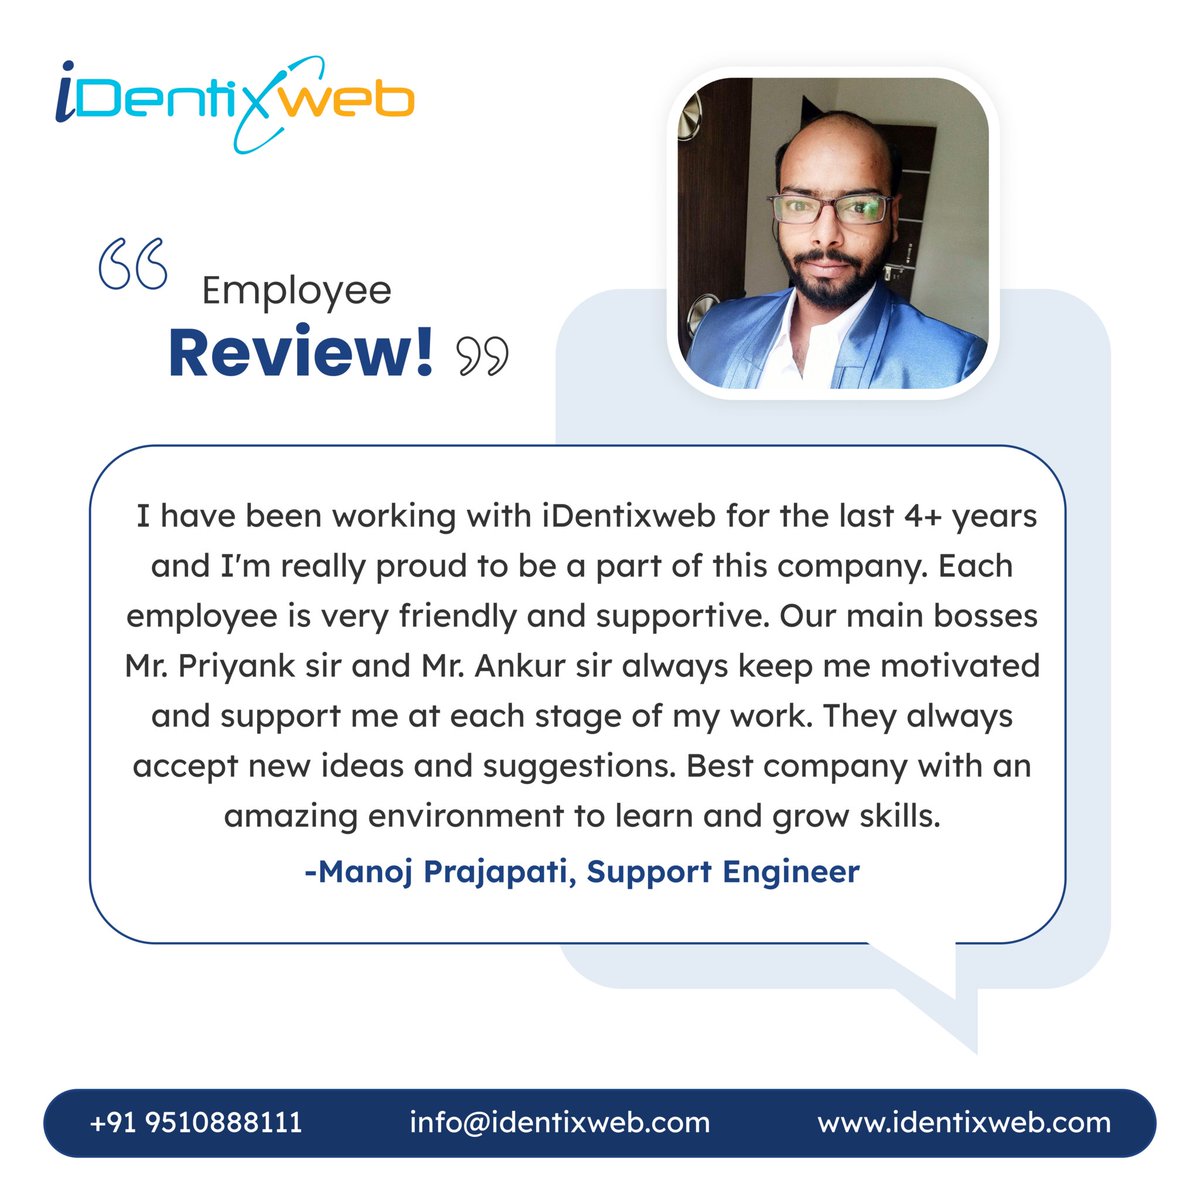 Employees are the firm pillars of an organization! Here's what are esteemed employee shares about his experience at Identixweb! Check it out now!

#identixweb #employee #employeereview #review #employeeengagement #employeebenefits #workculture